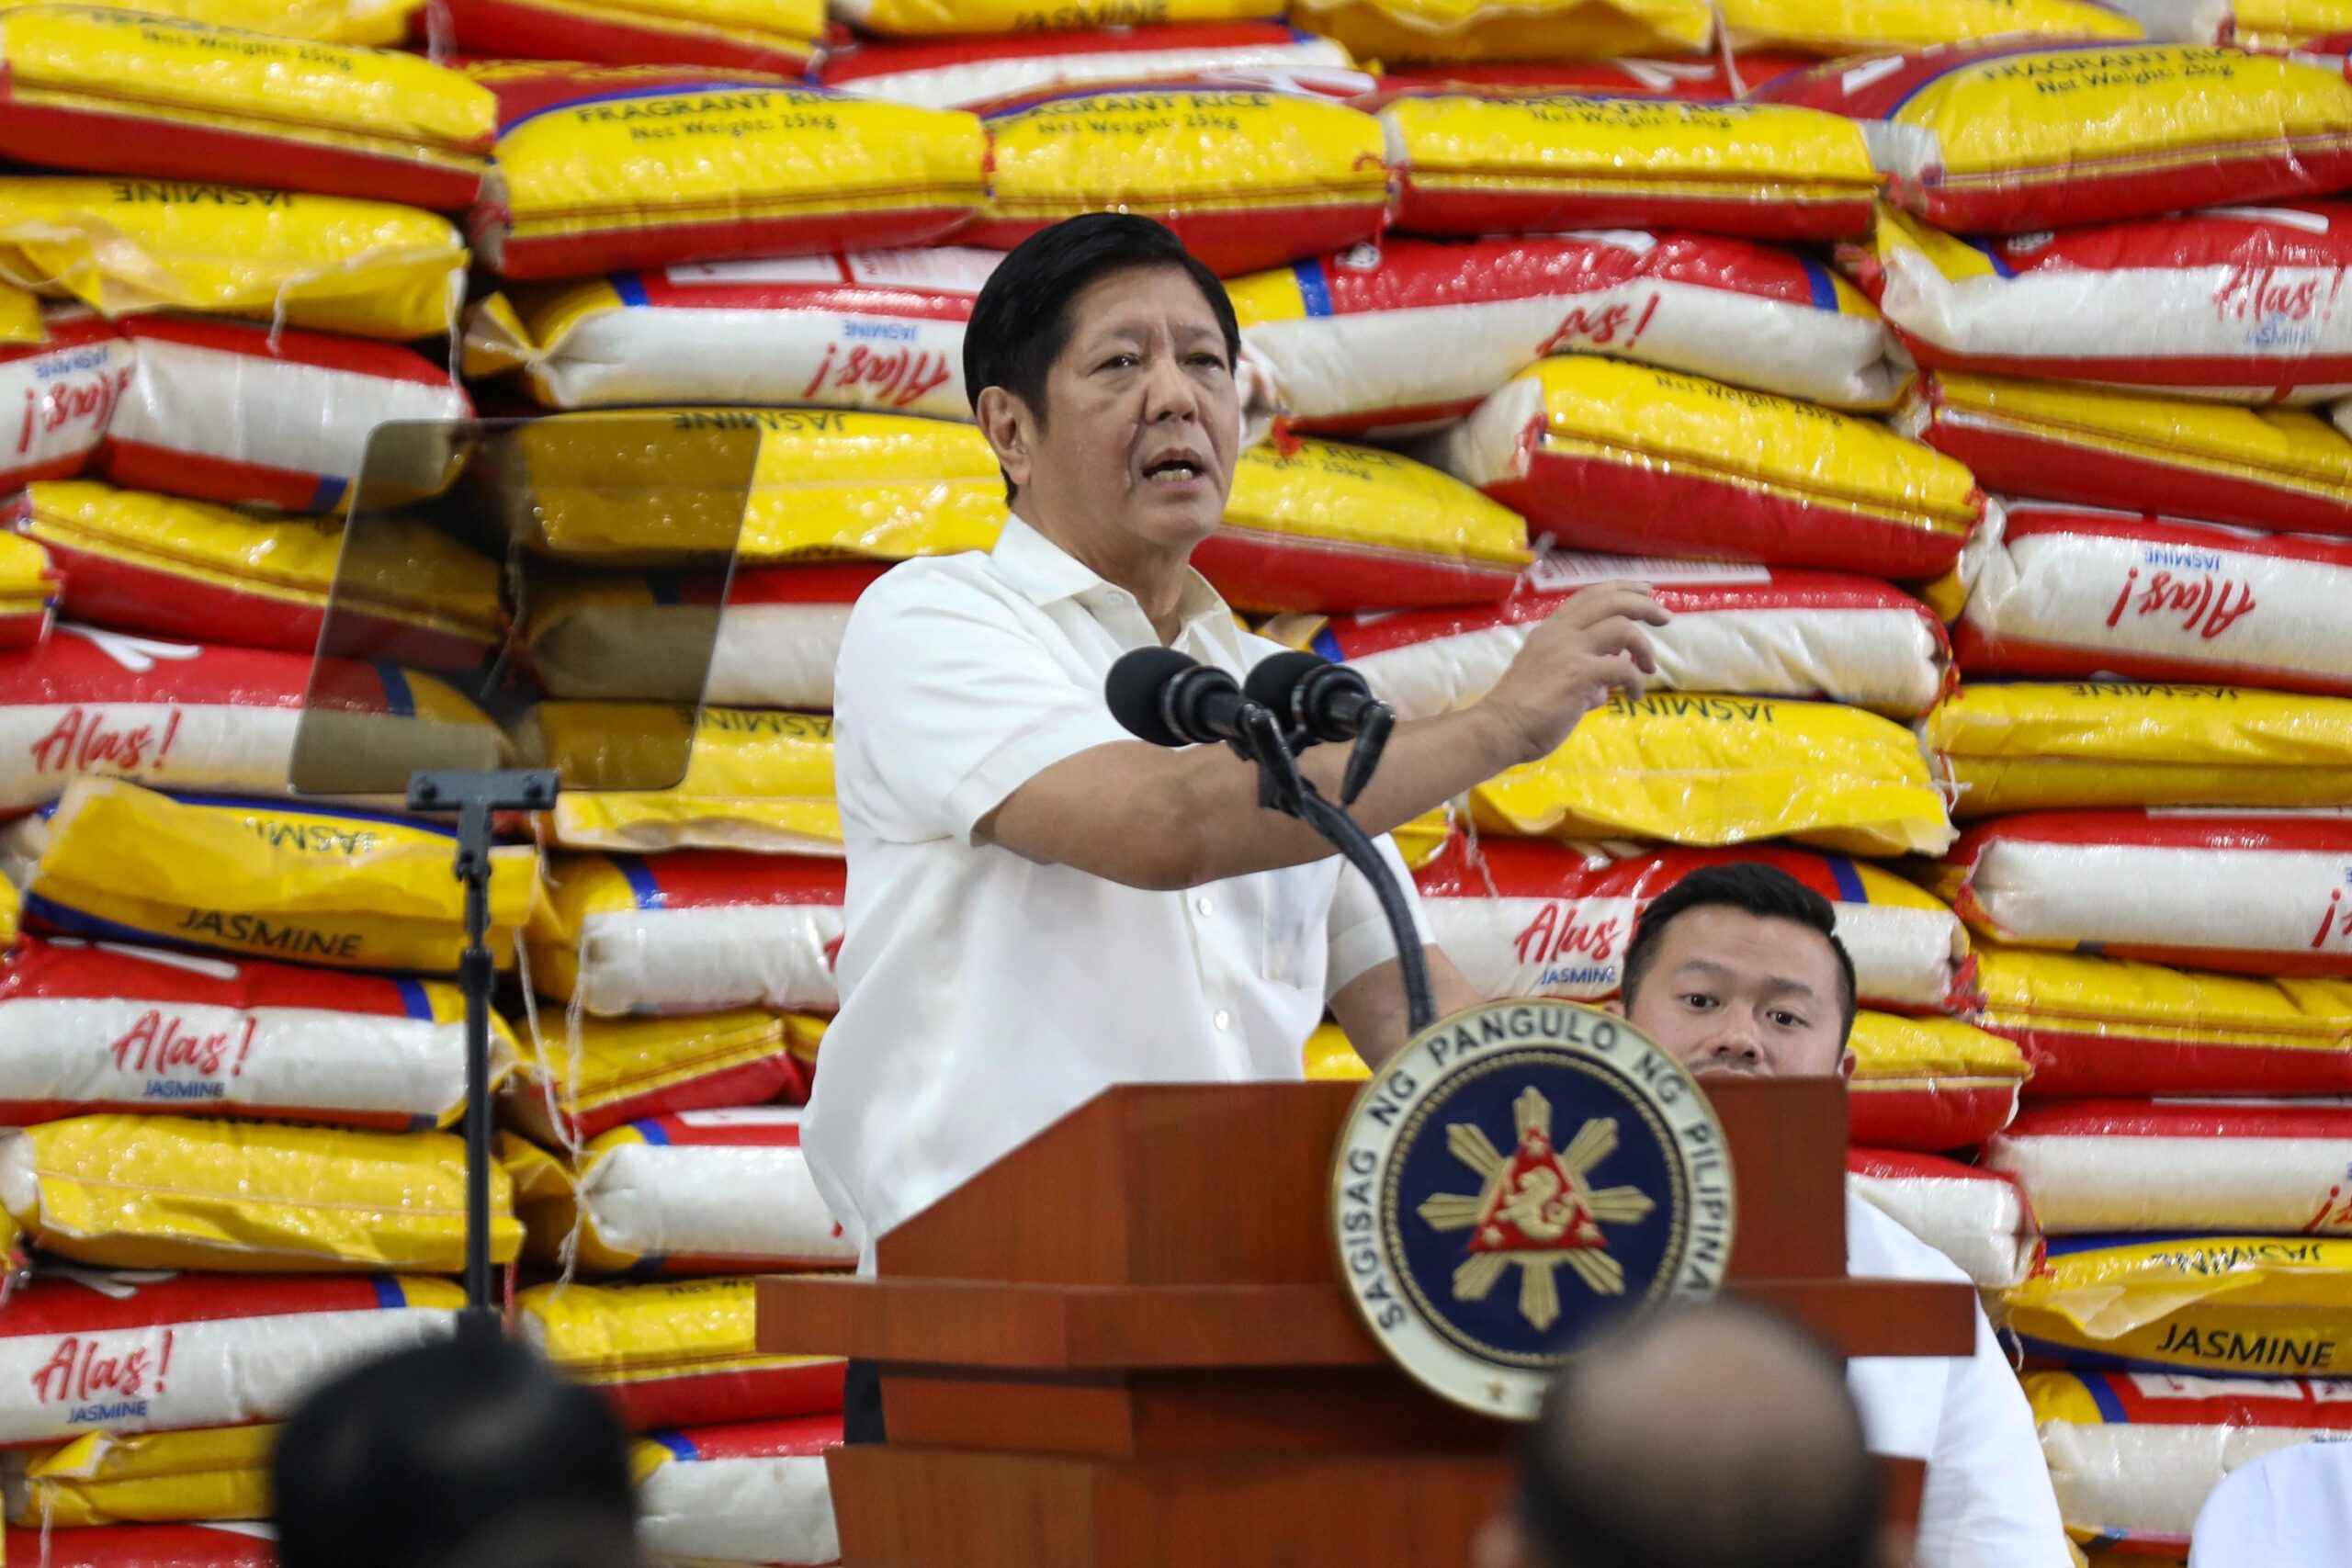 Marcos lifts price cap on rice